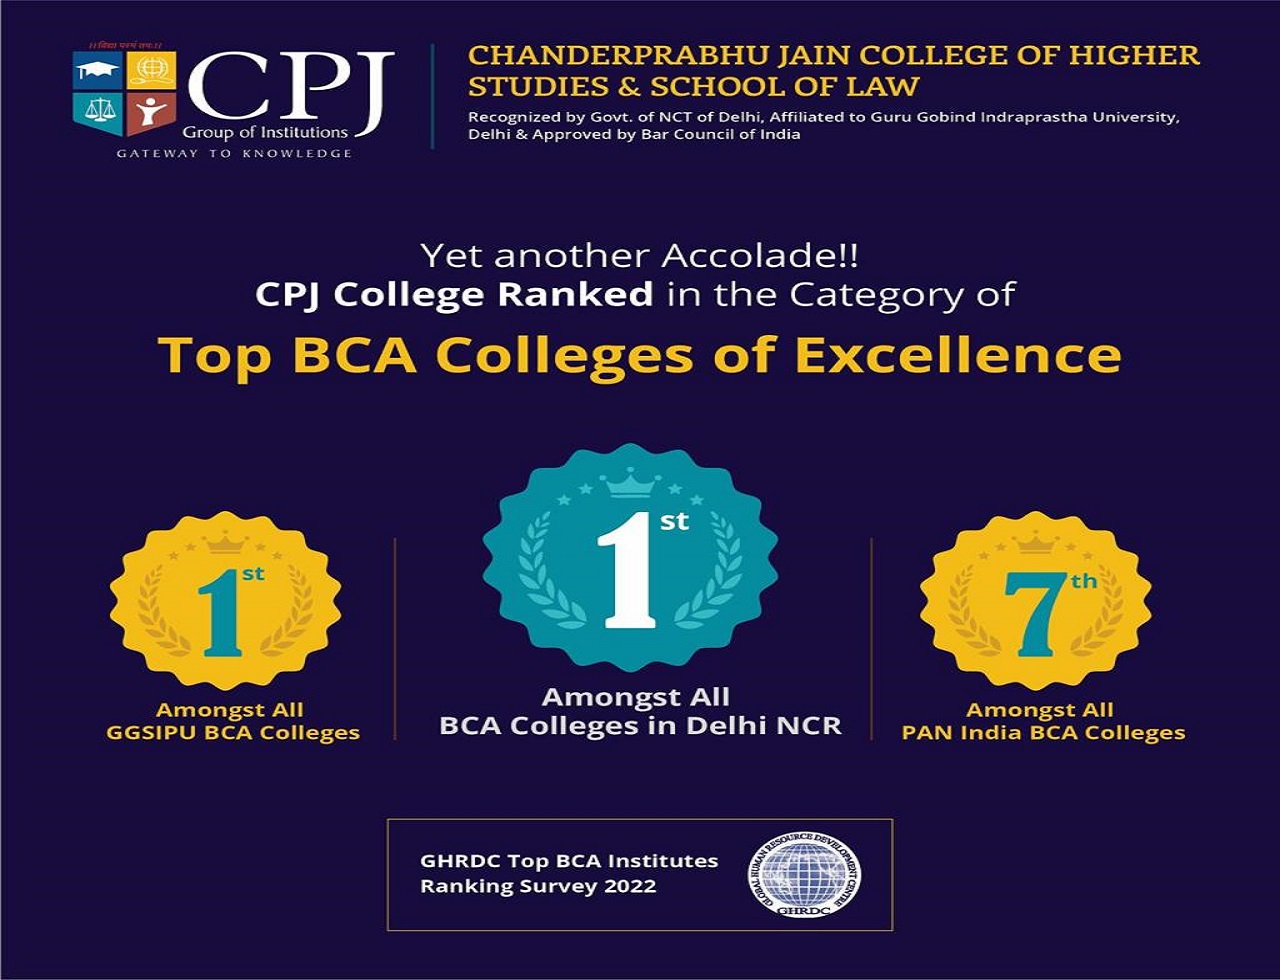 GHRDC Survey 2022 in the Category of Top BCA Colleges